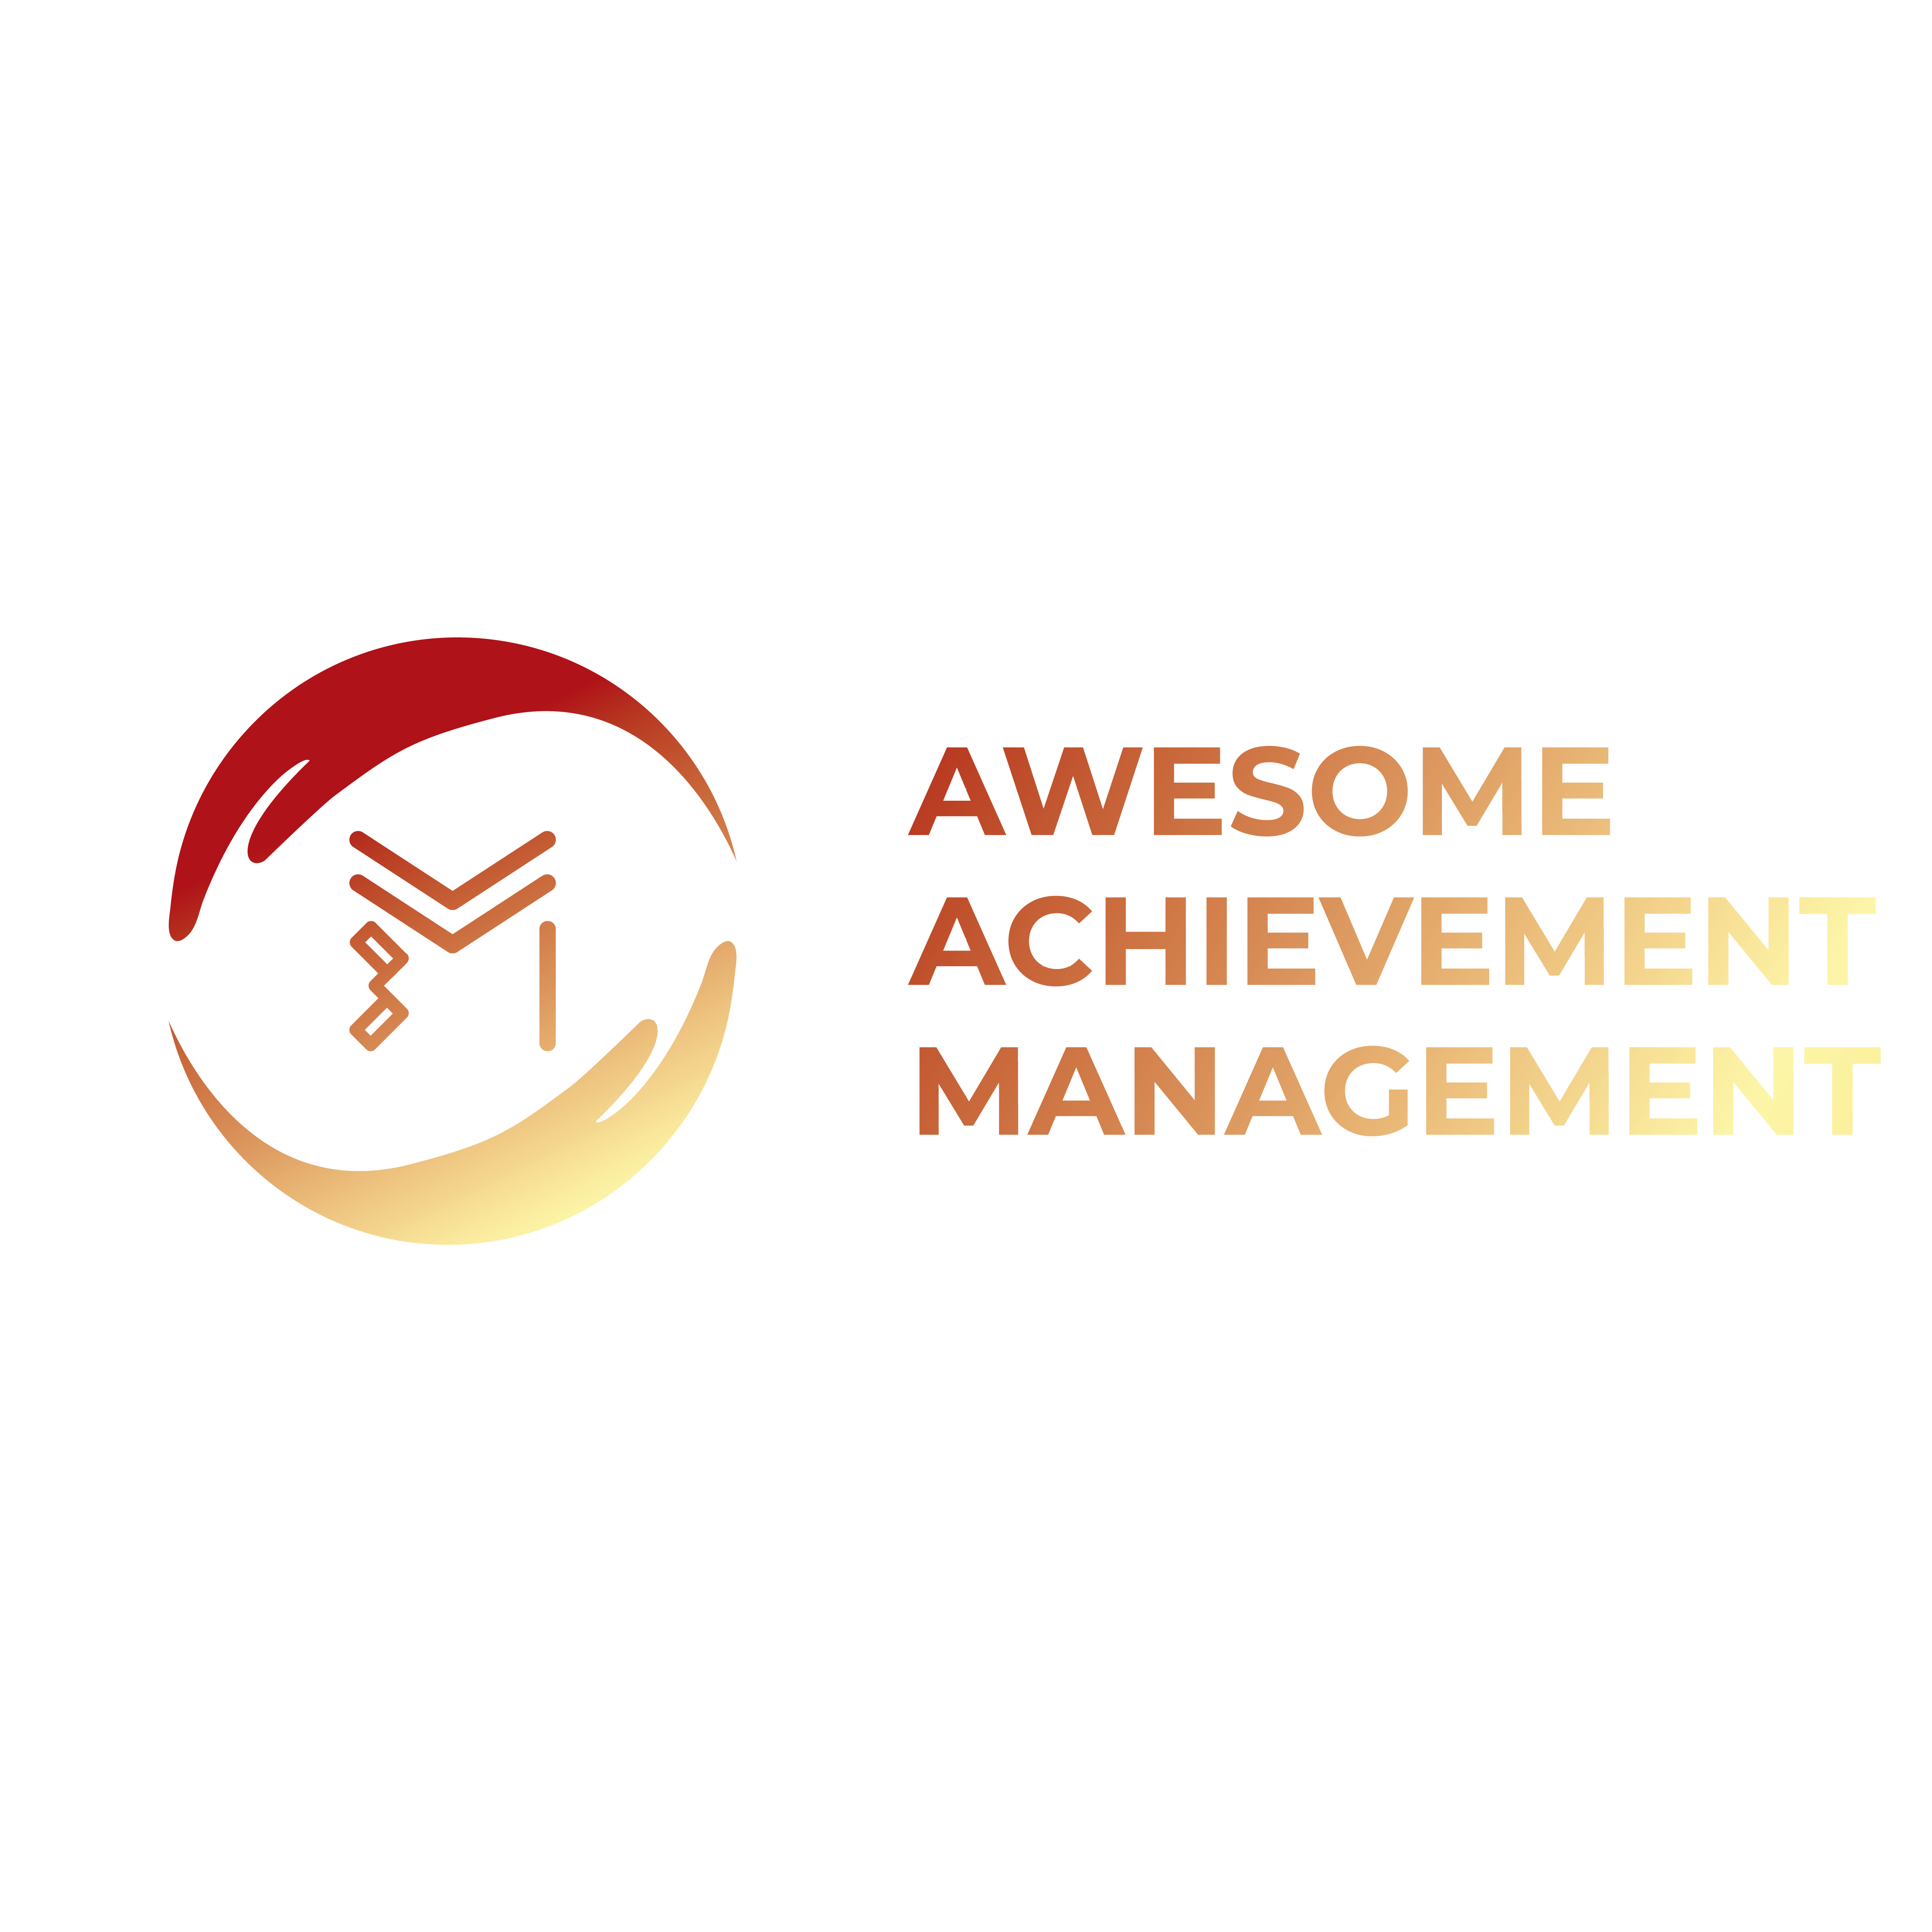 jobs in Awesome Achievement Management